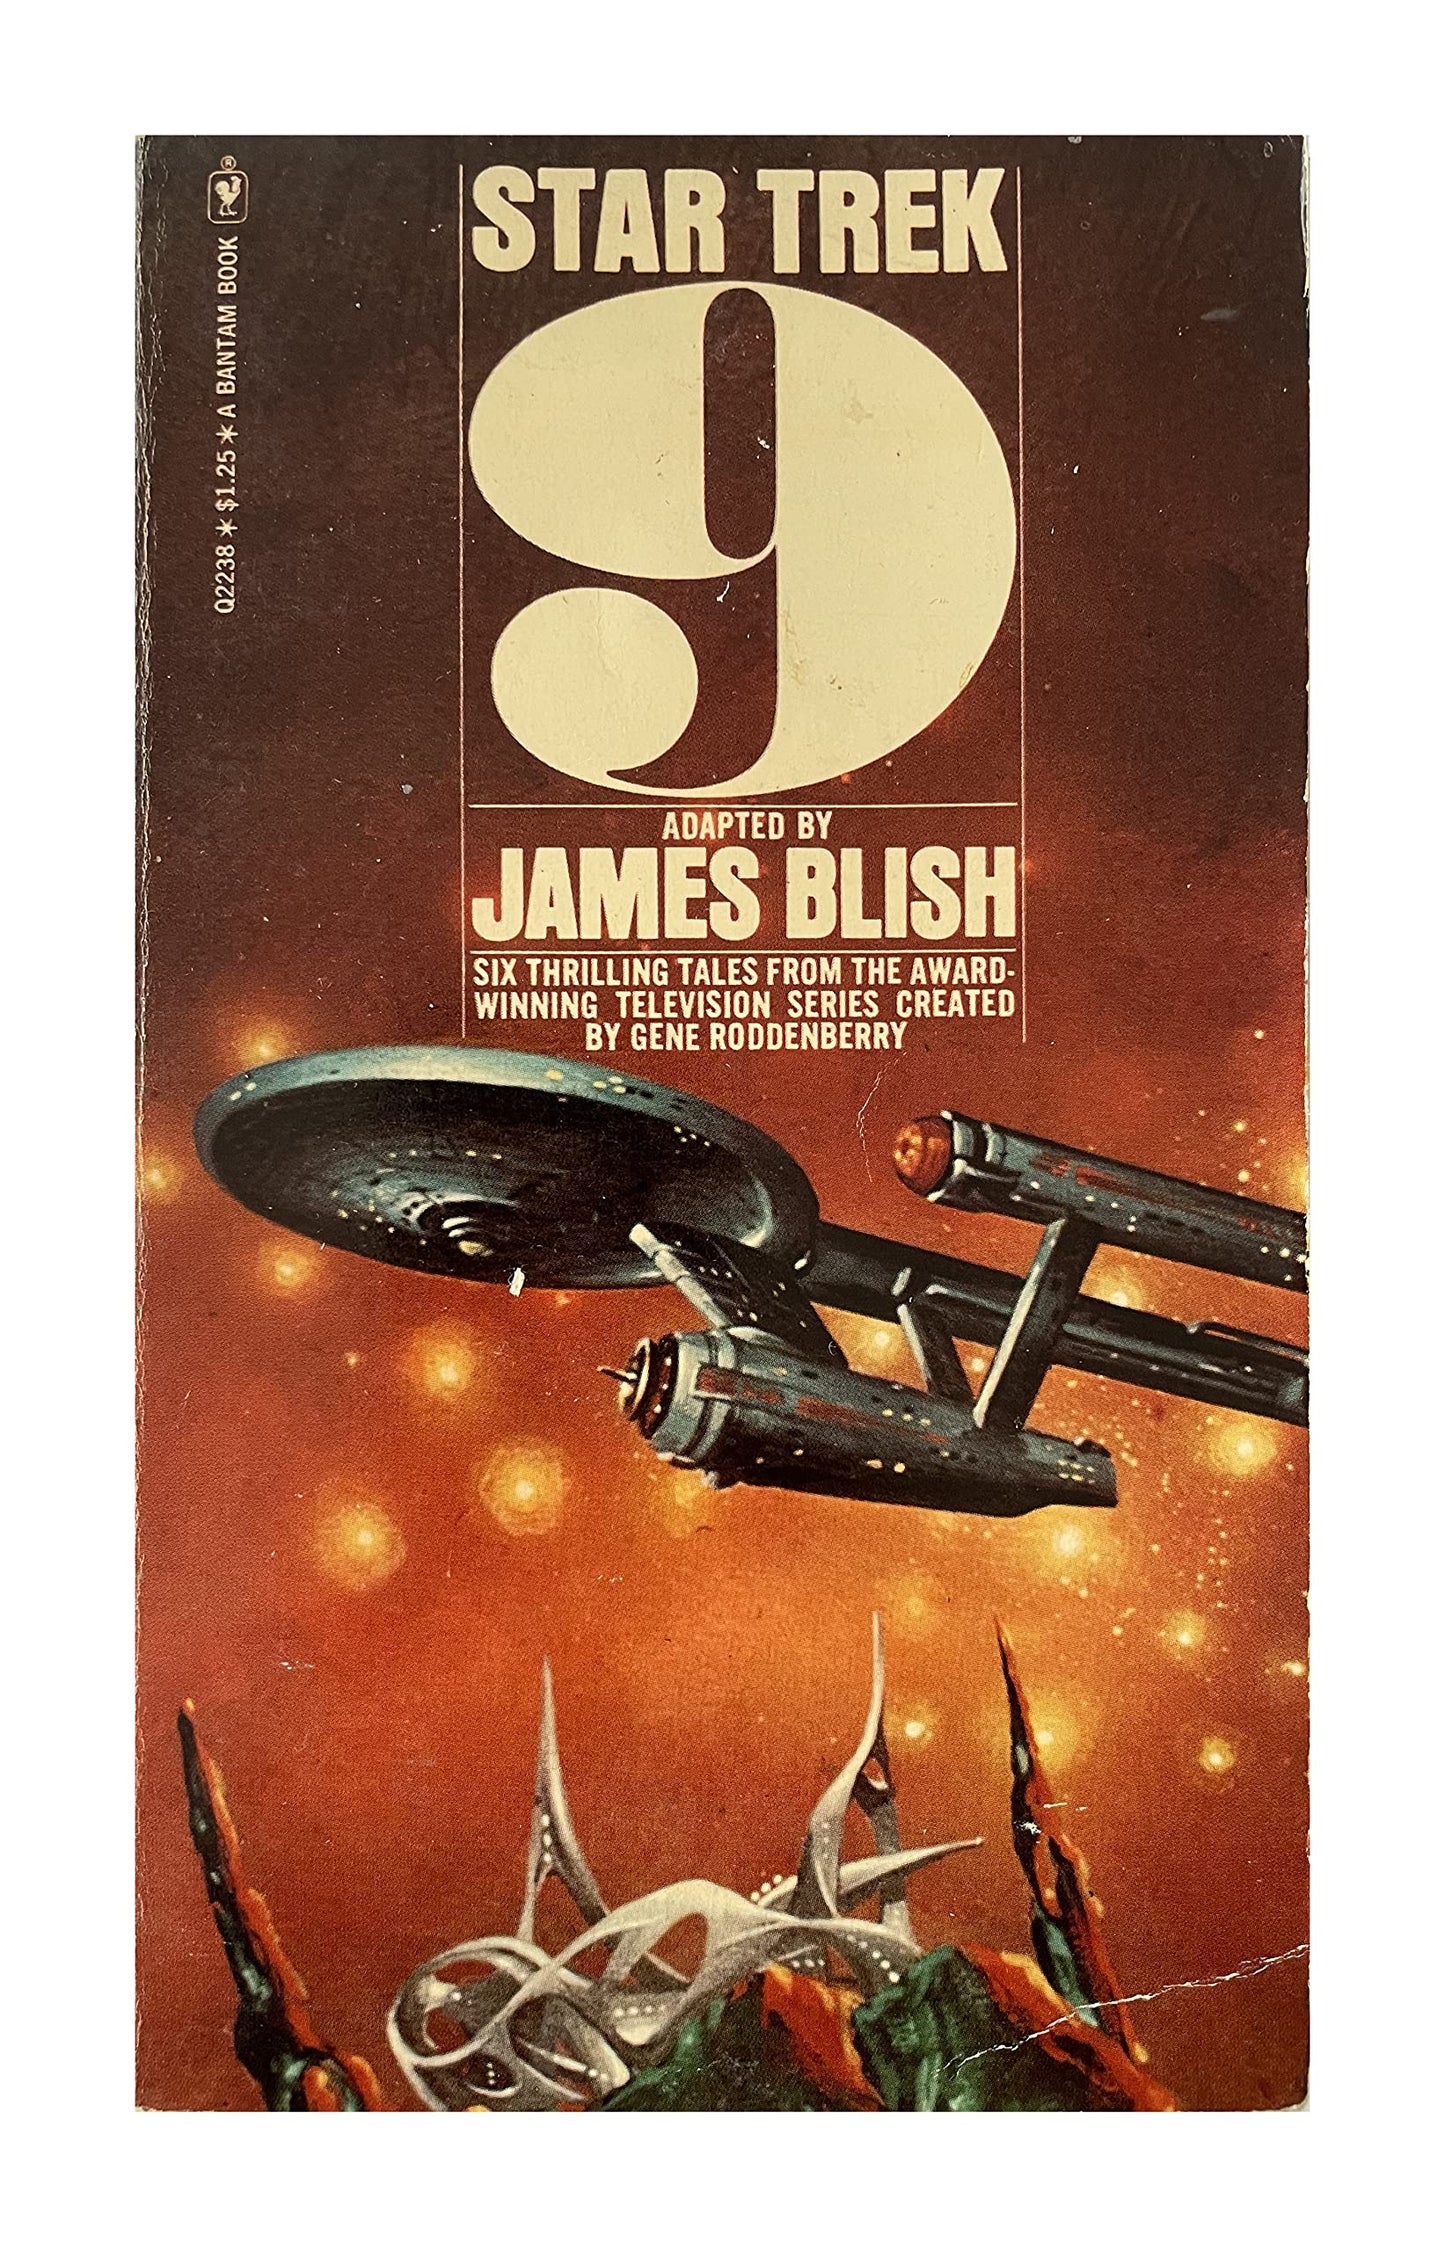 Vintage 1975 Star Trek 9 - Adapted From The Original Television Series - Paperback Book - By James Blish